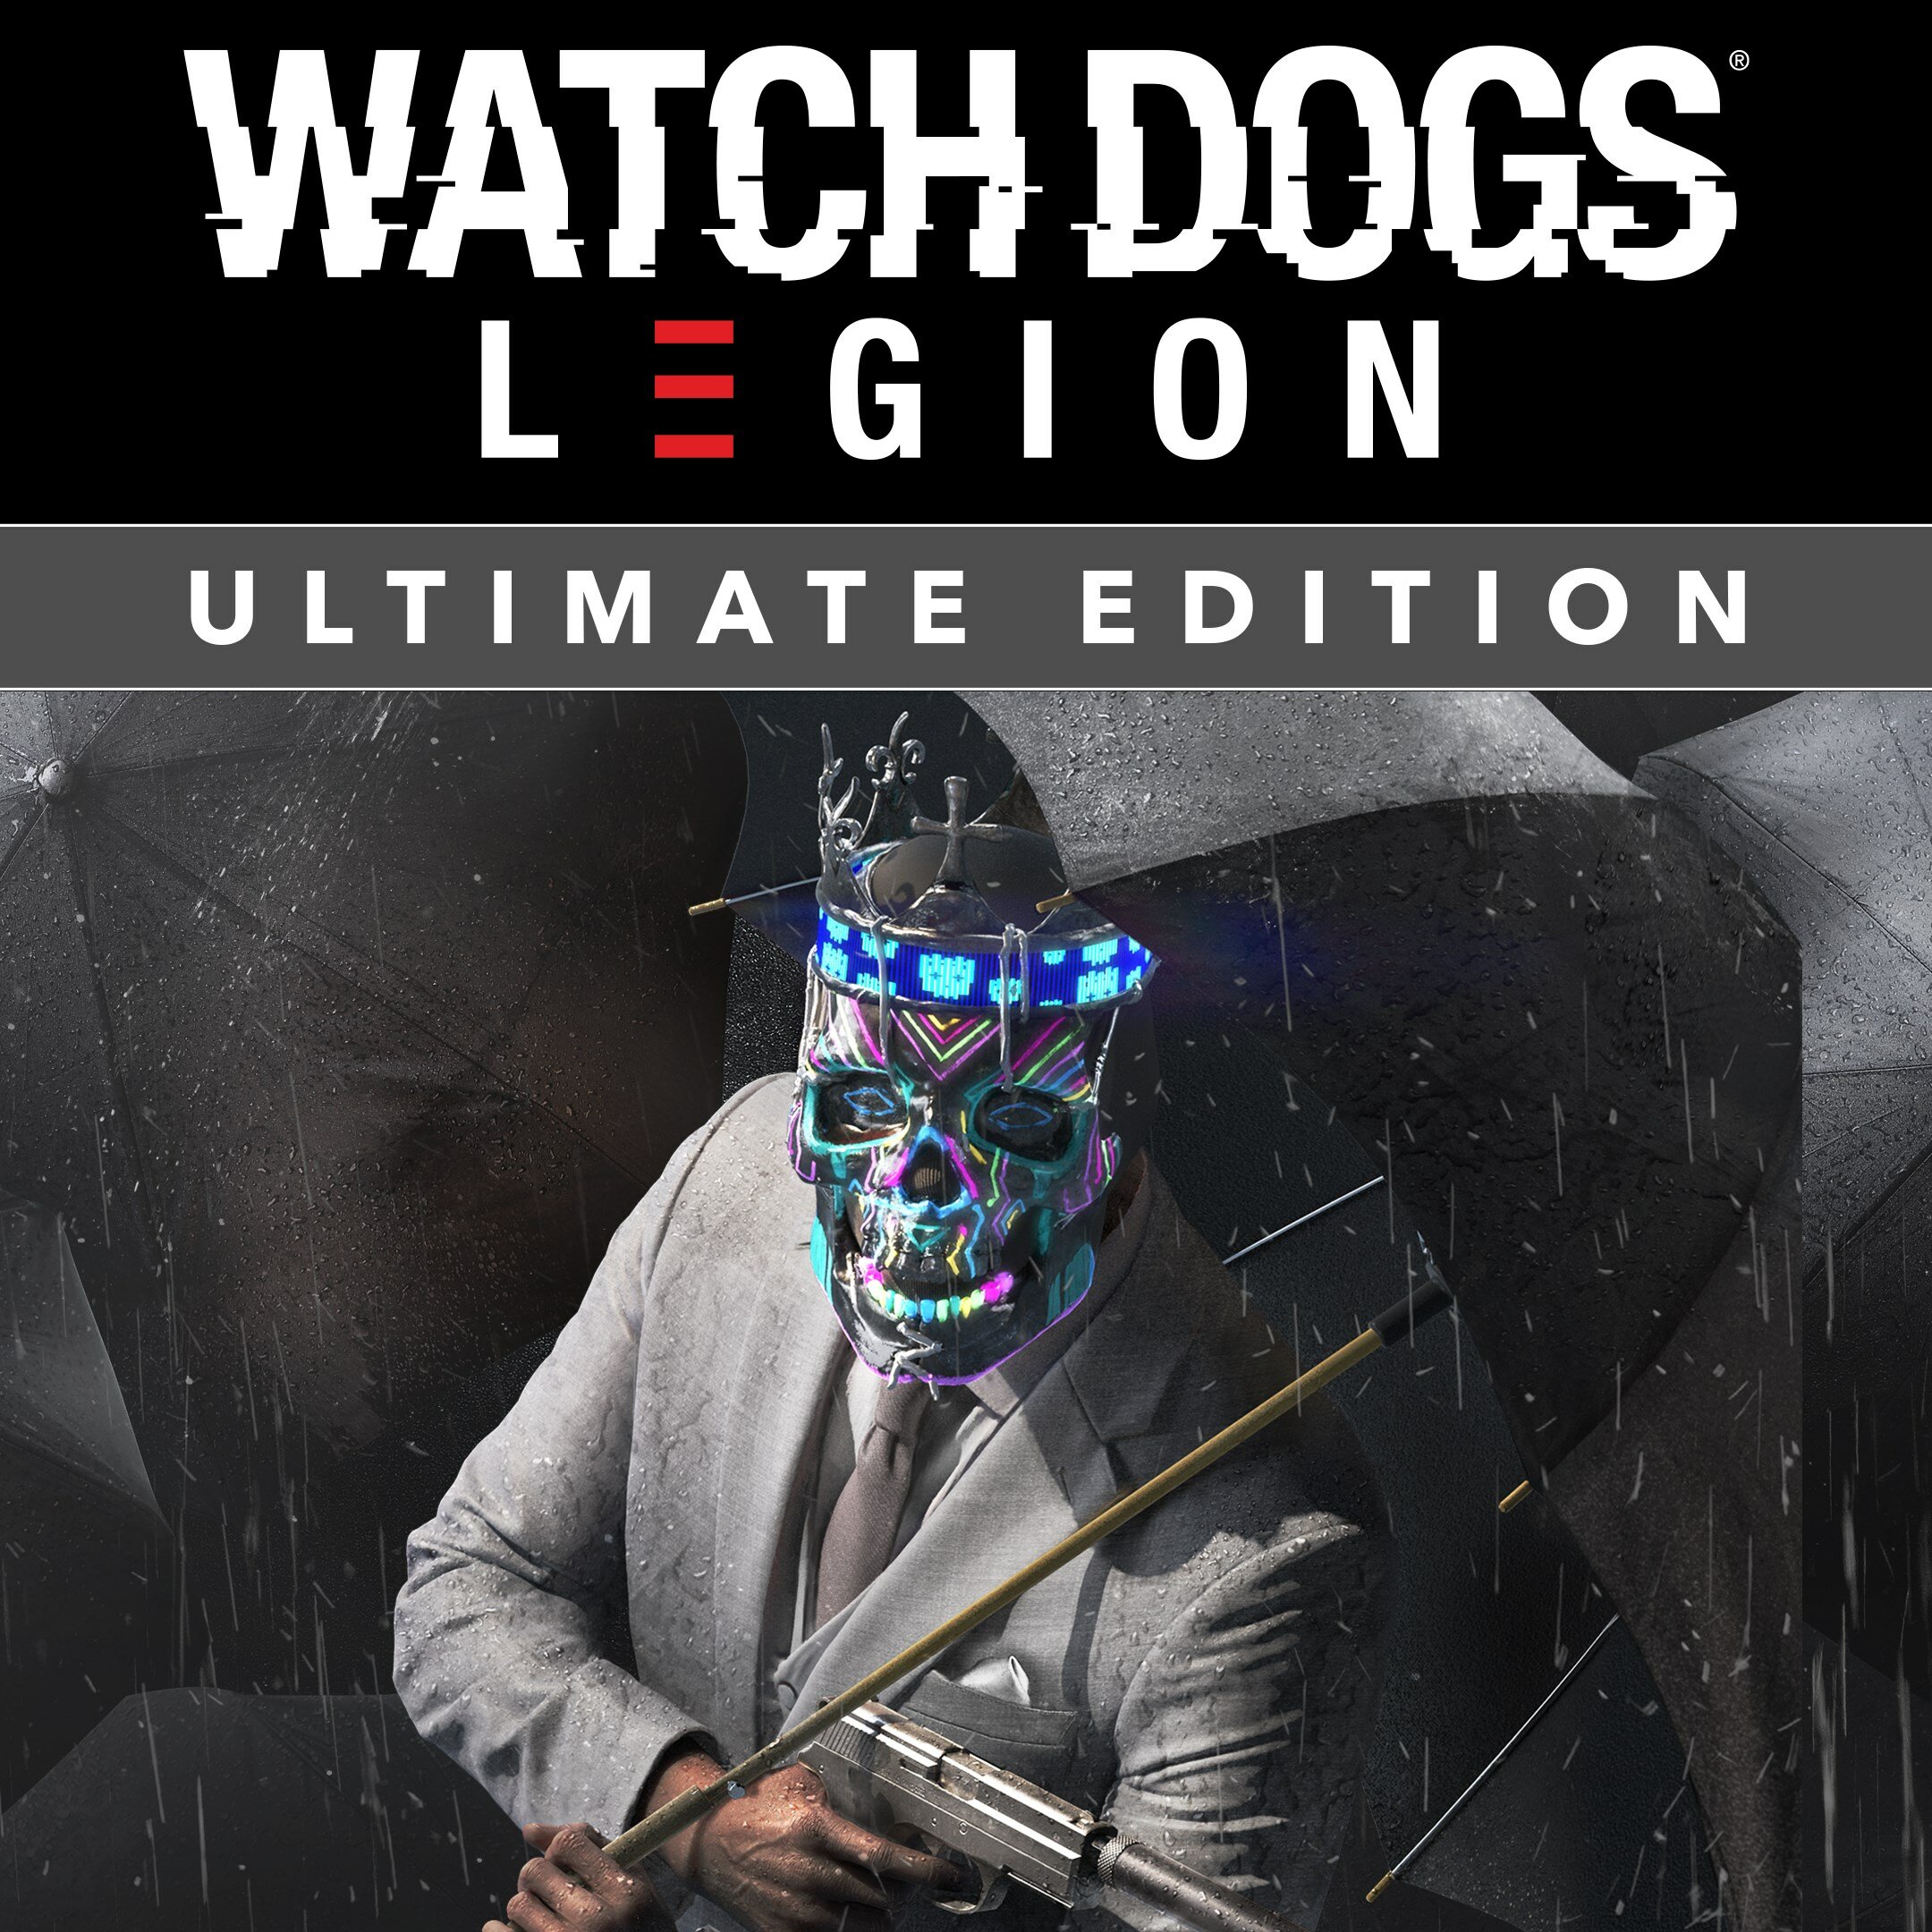  Watch Dogs: Legion Ultimate Edition  Series X|S, Xbox One   